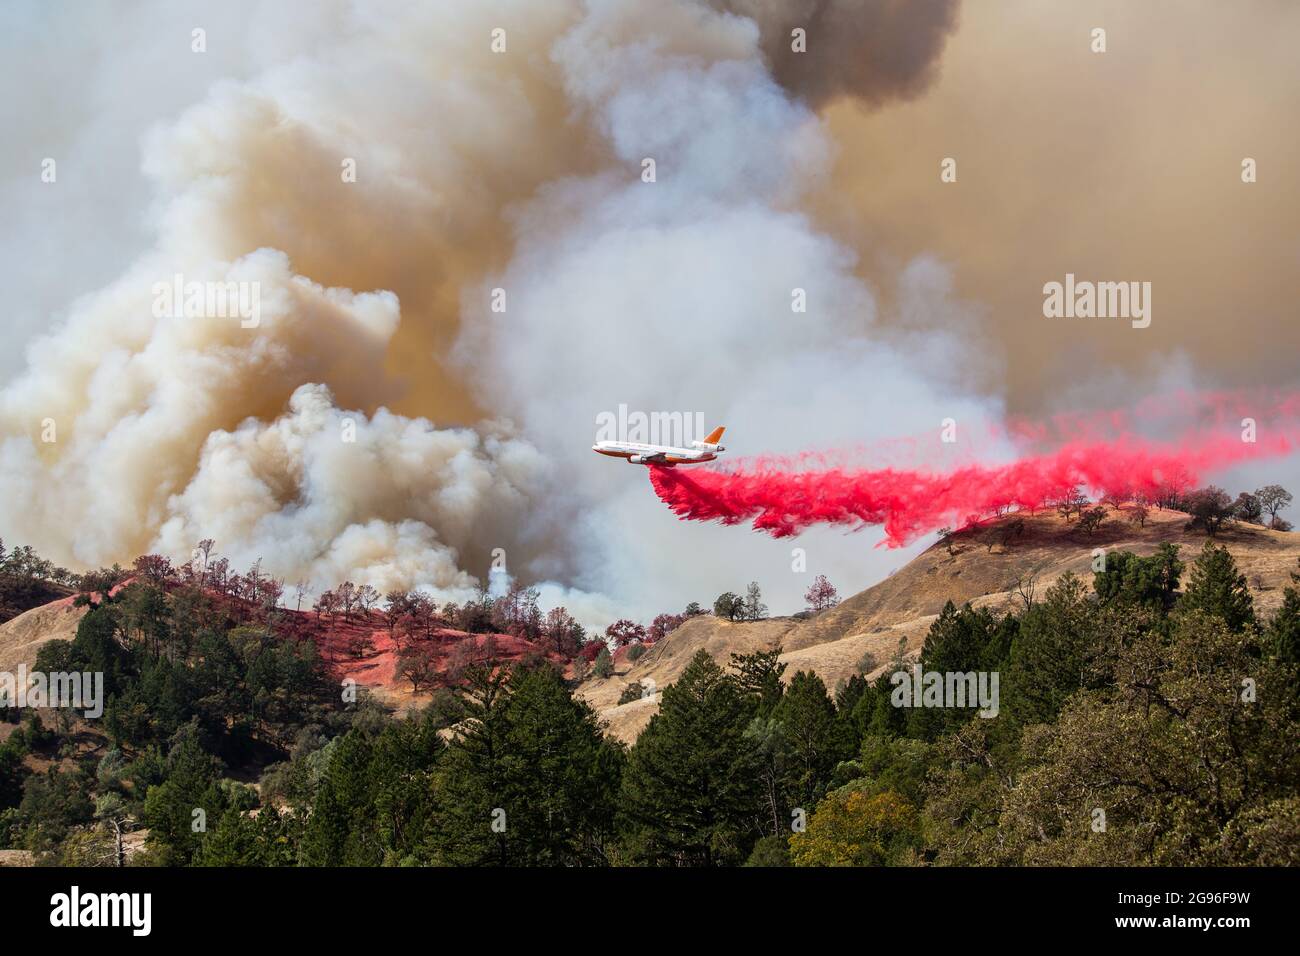 A DC-10 air tanker operated by Tanker 10 drops retardant on the Kincade fire in Sonoma County, California on October 24, 2019. Stock Photo